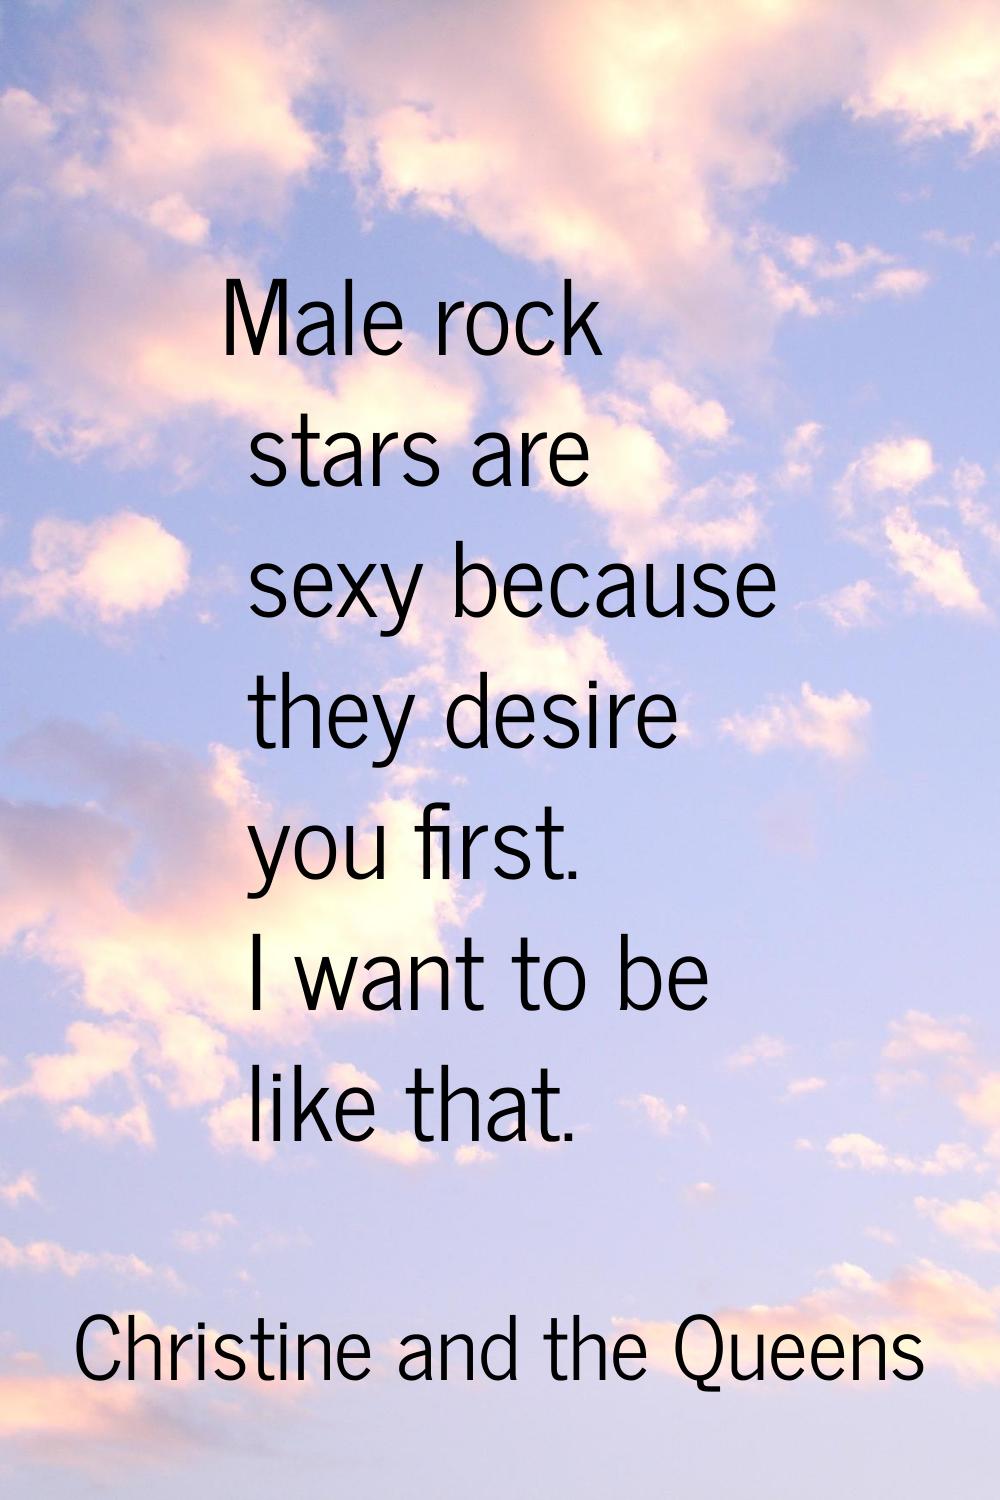 Male rock stars are sexy because they desire you first. I want to be like that.